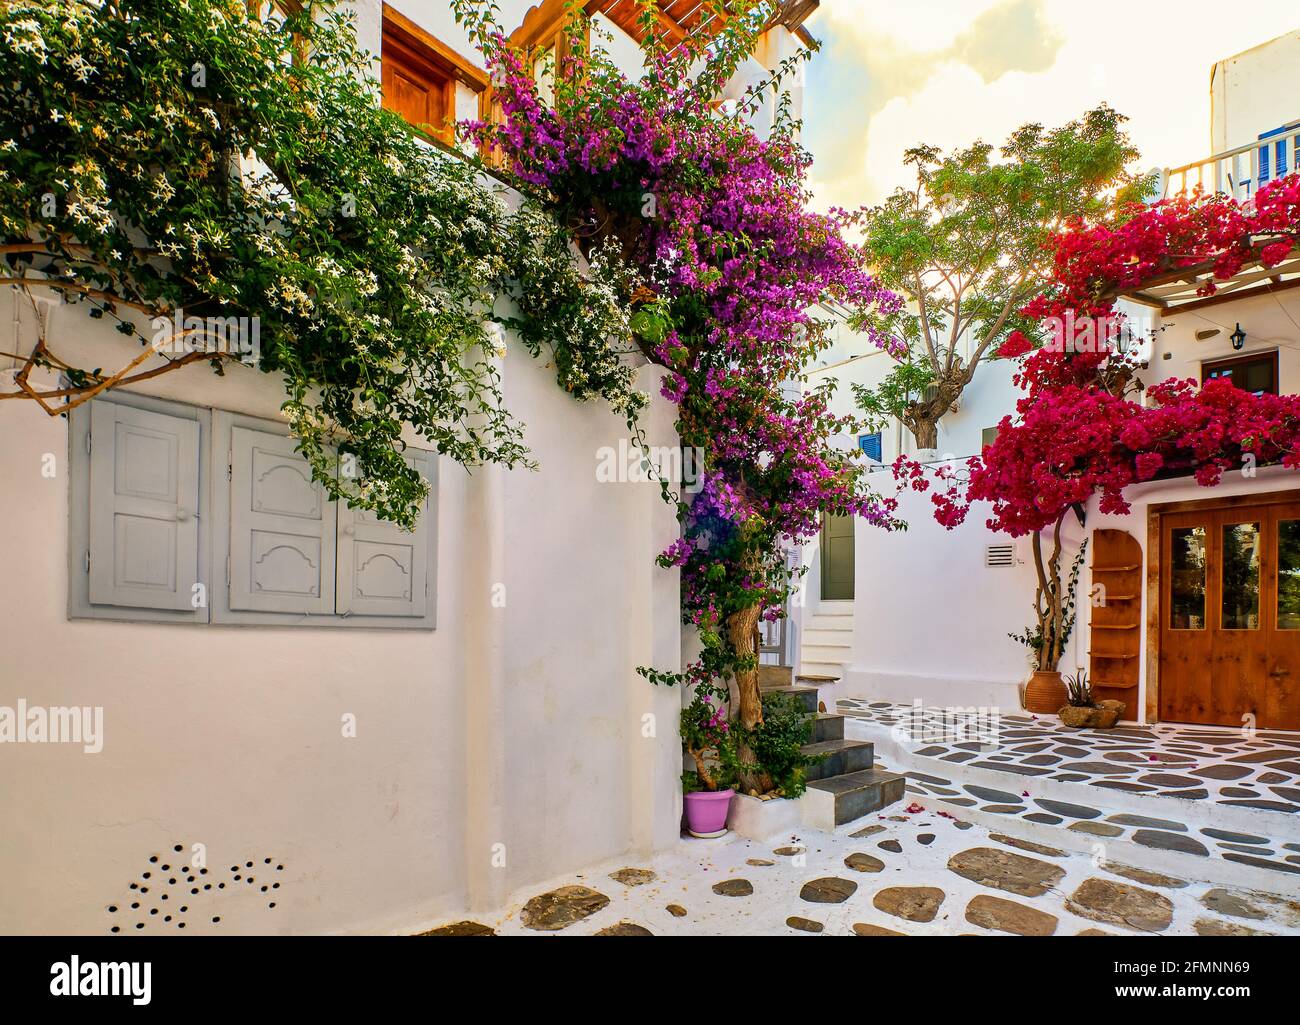 Beautiful traditional streets of Greek island towns. Whitewashed houses, rich bougainvillea in blossom, cobblestone pavement. Mykonos, Greece Stock Photo